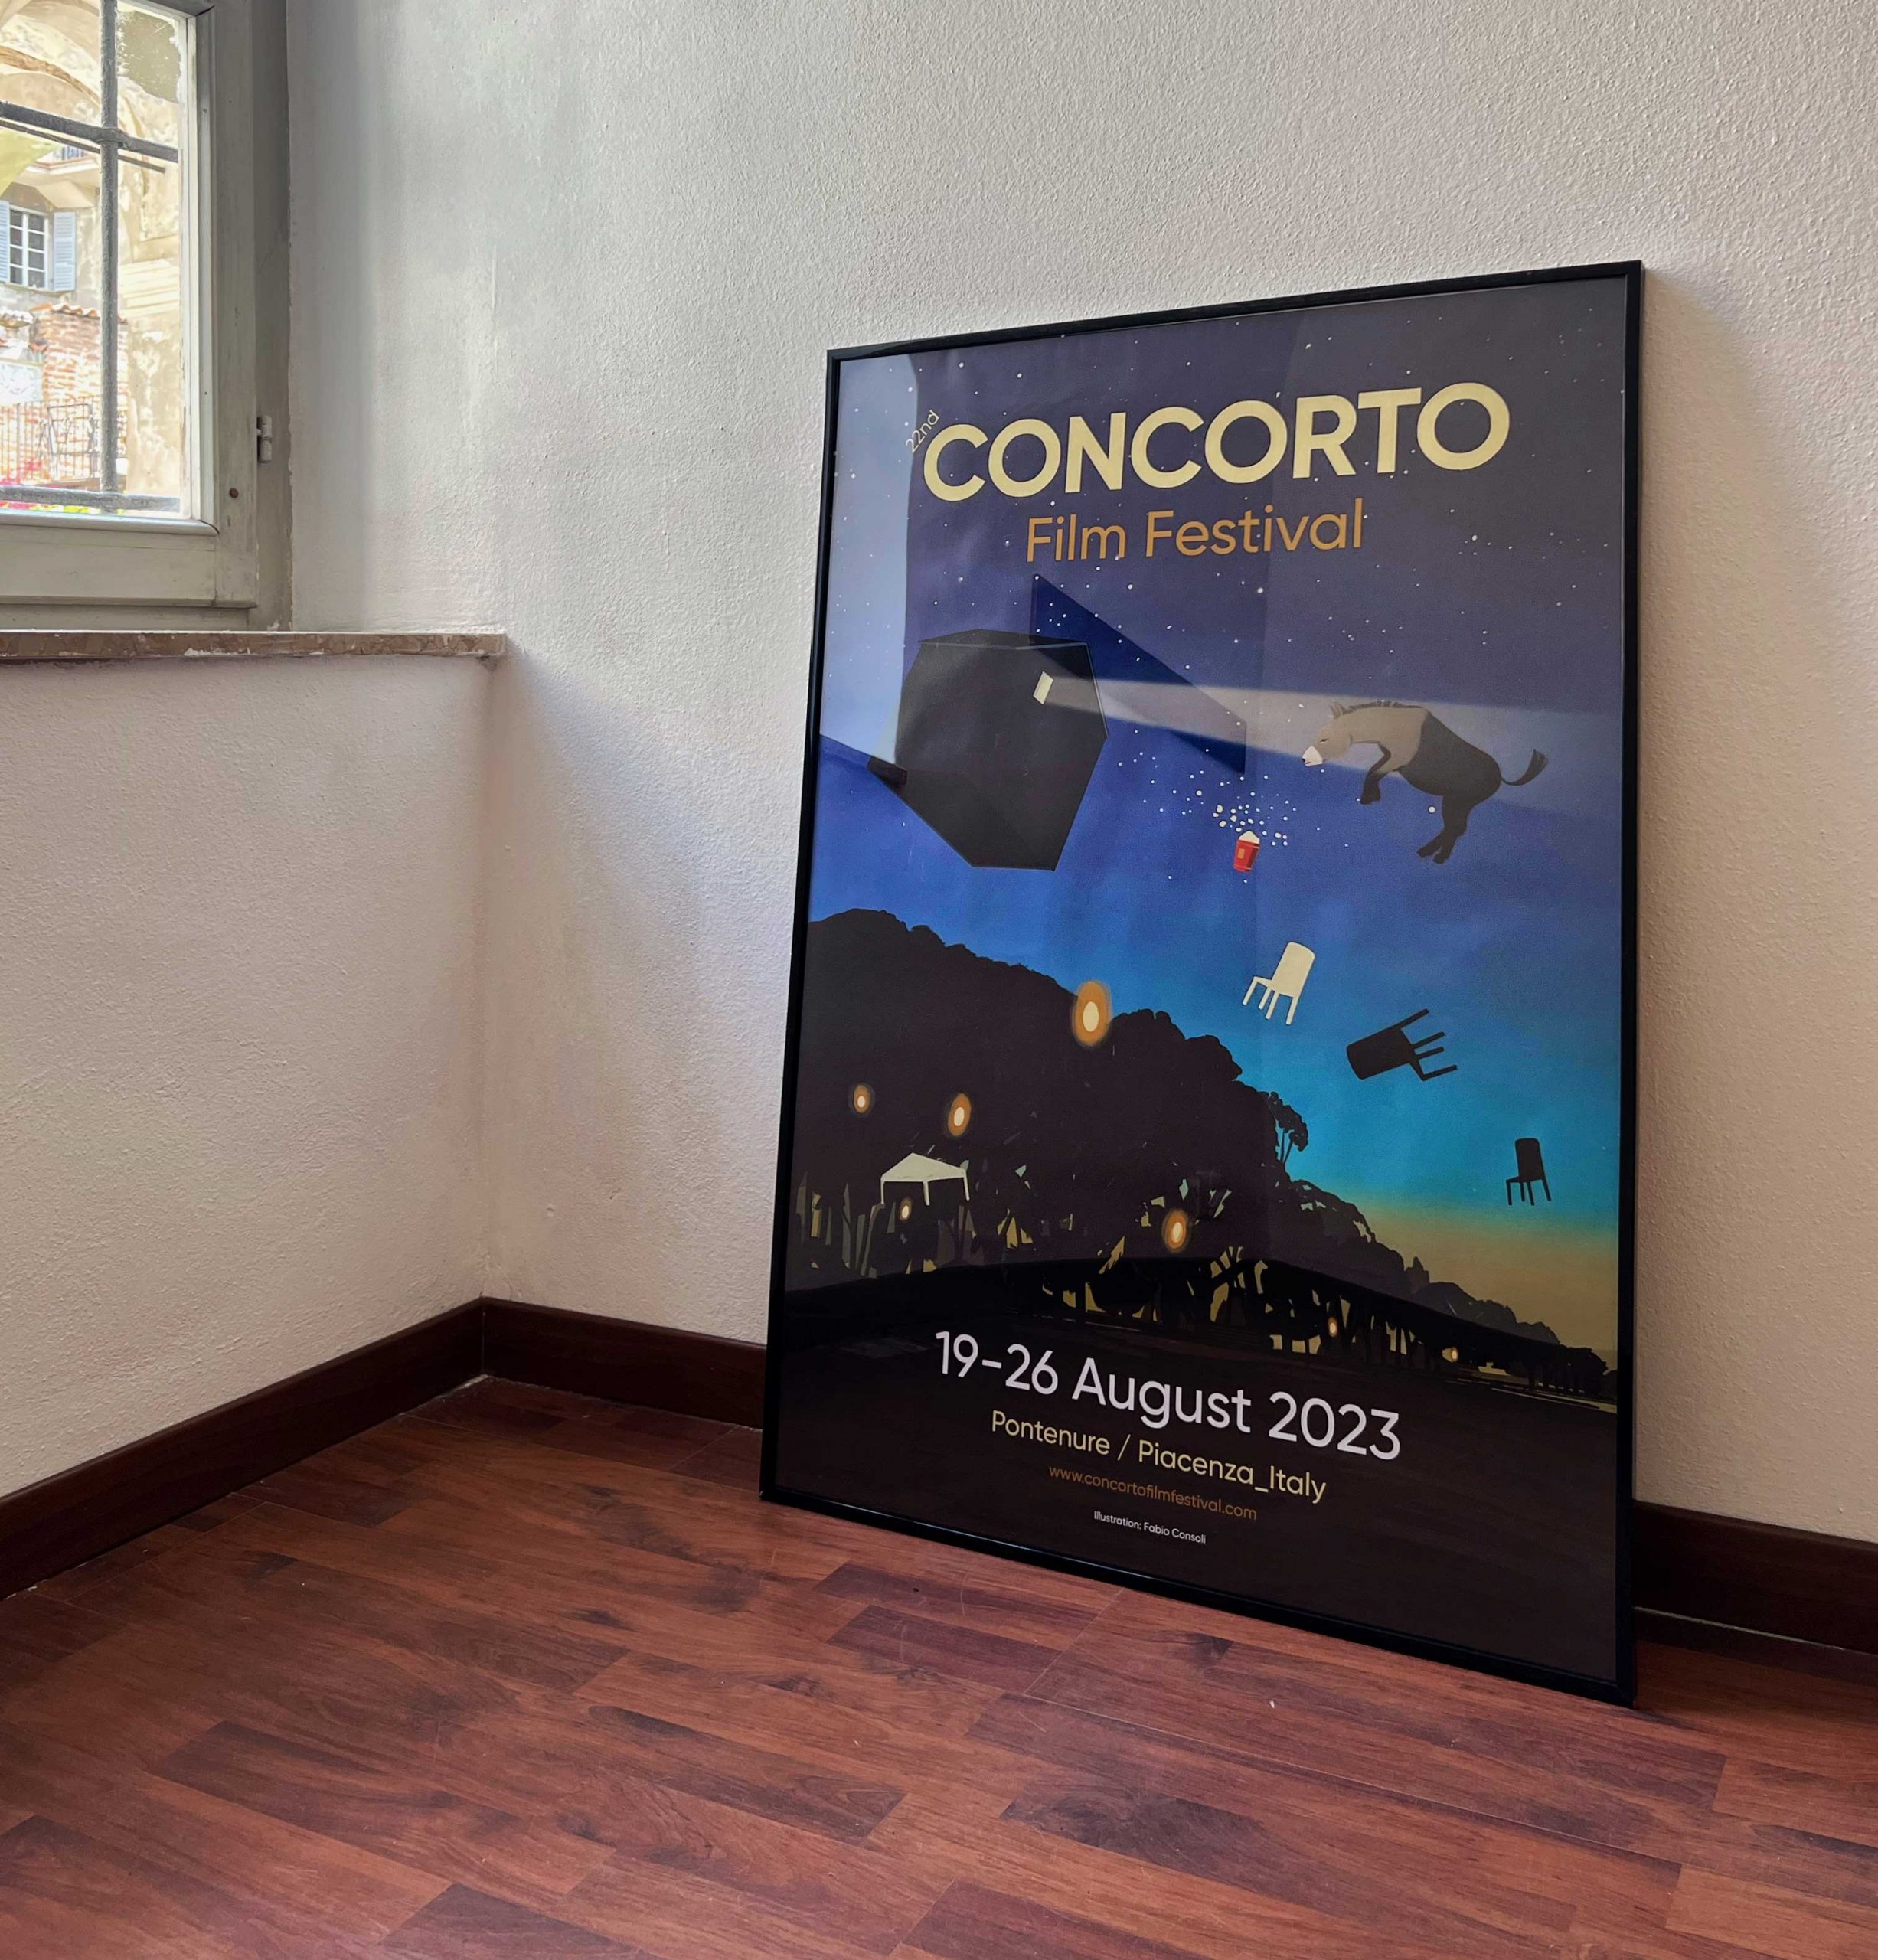 OPENING OF CONCORTO’S NEW VENUE AT RATHAUS